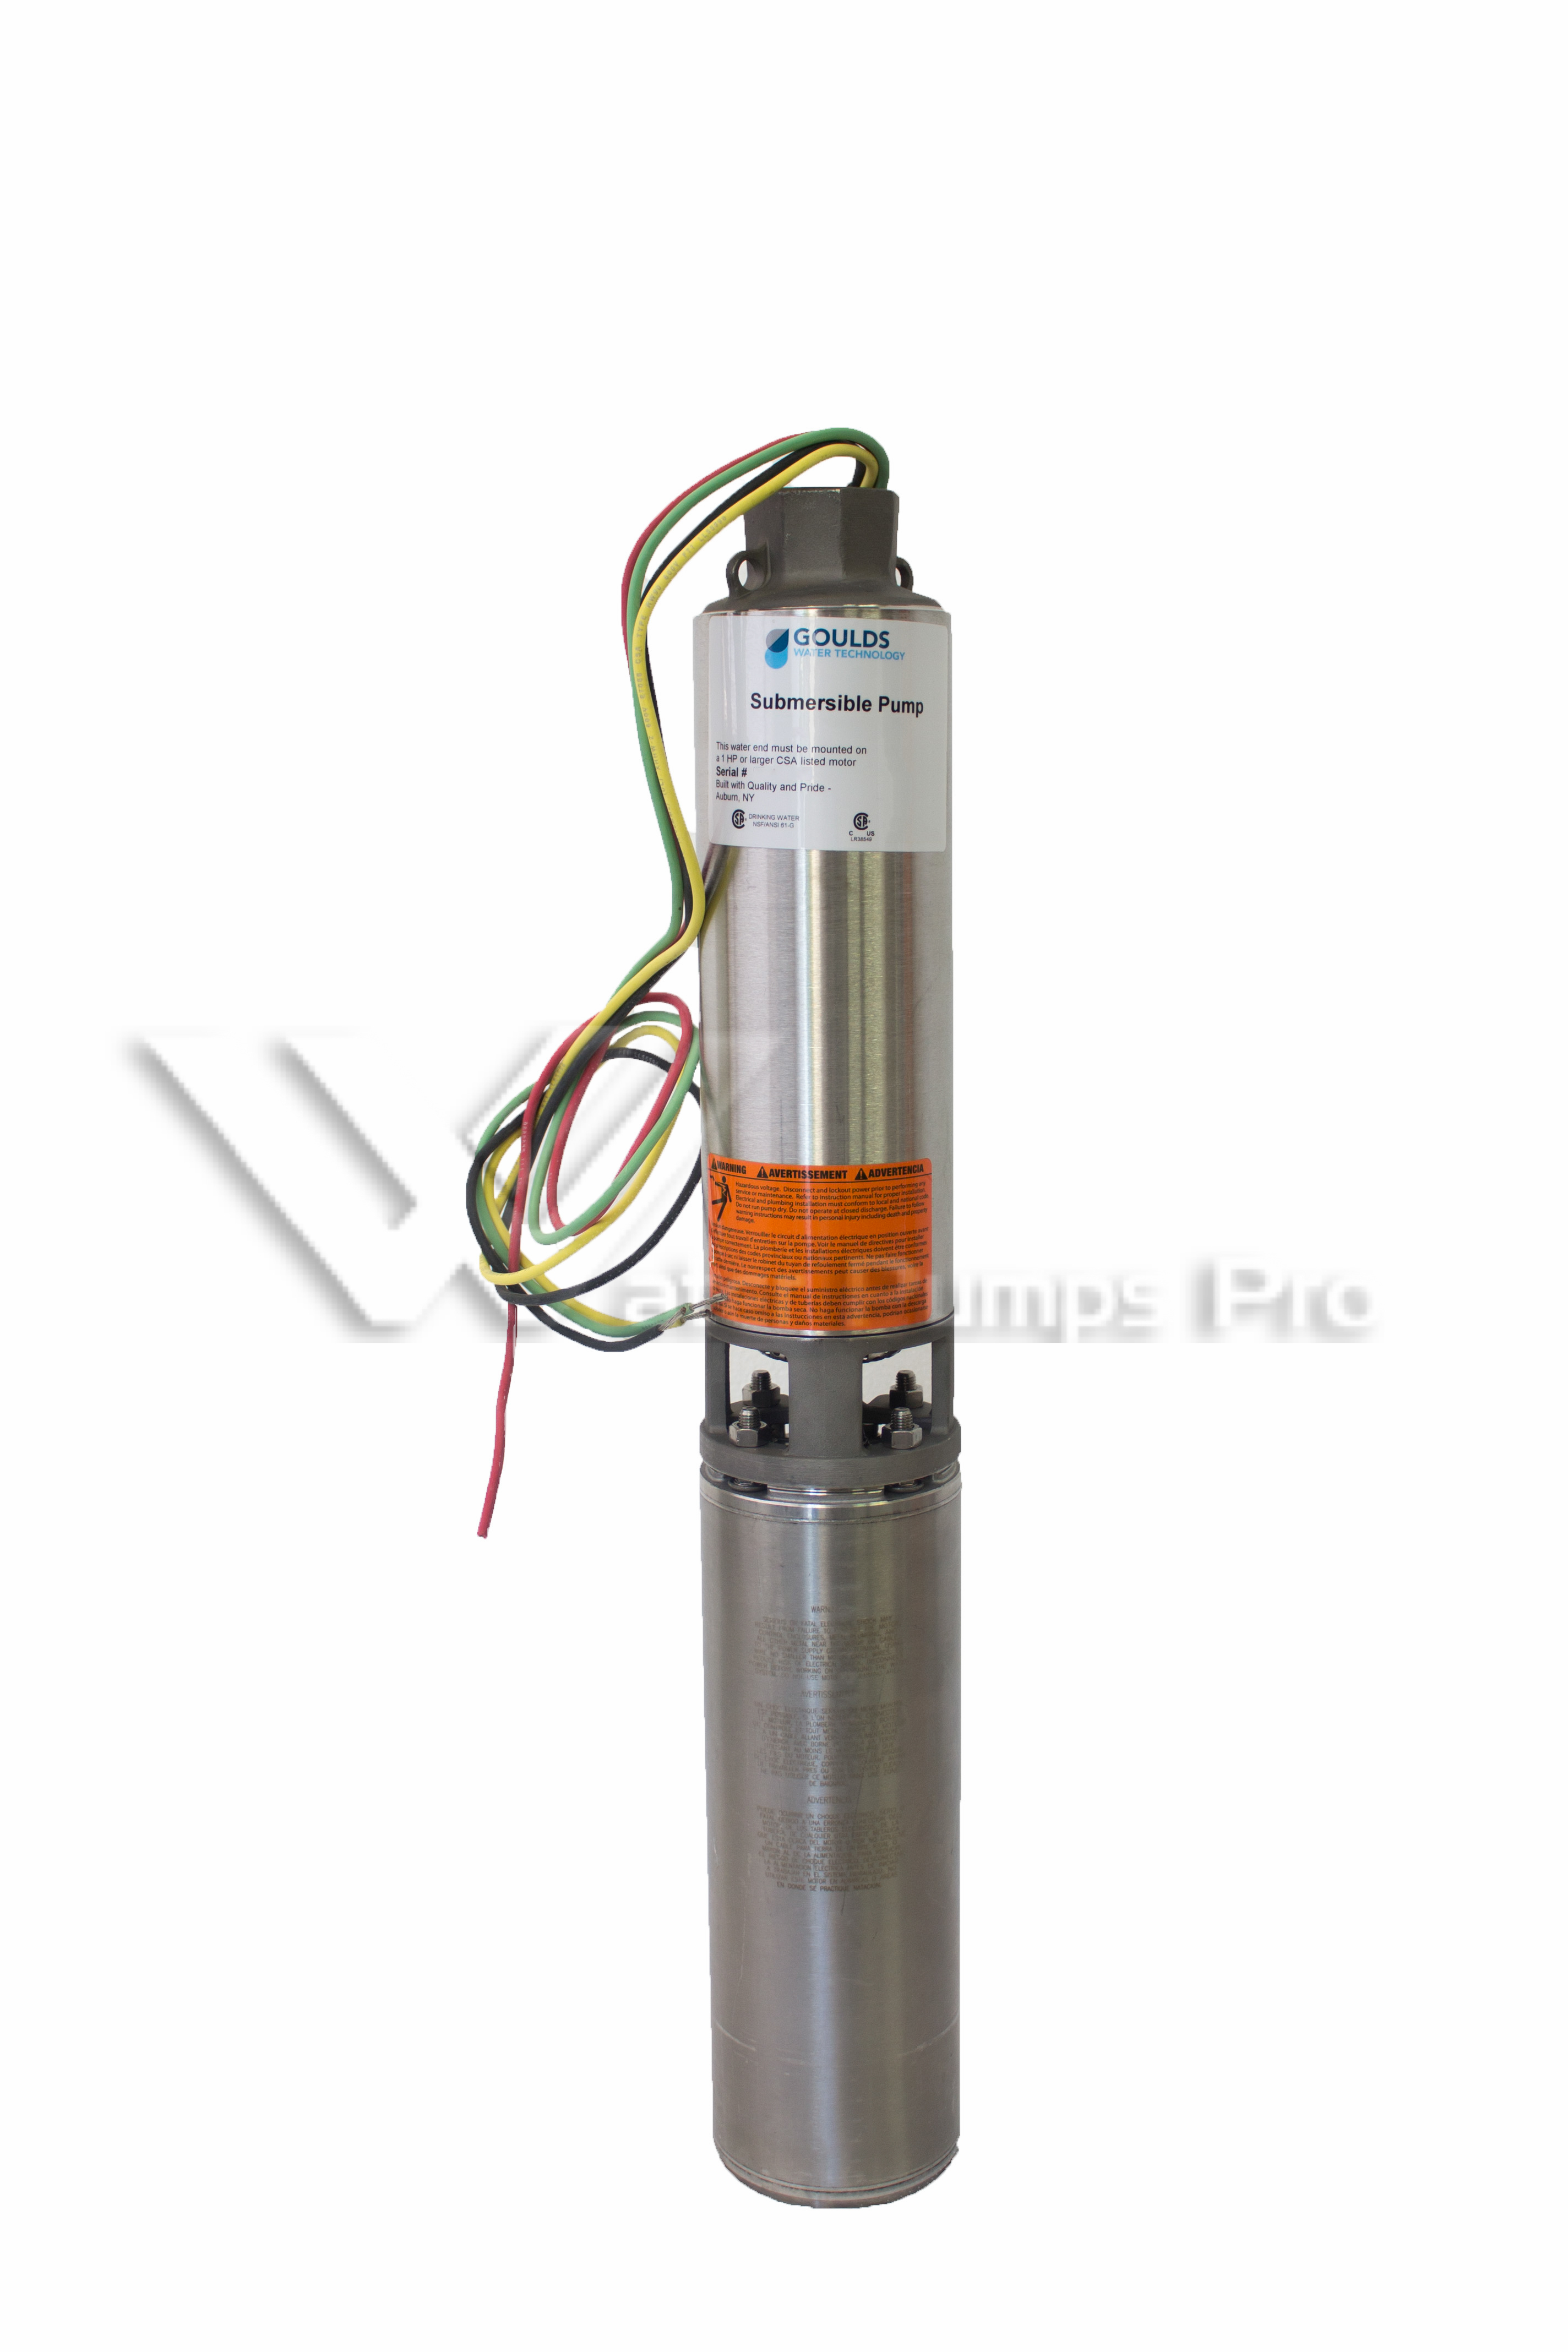 Goulds 10GS20432C 10GPM 2HP 230V 3 Phase Submersible Well Pump